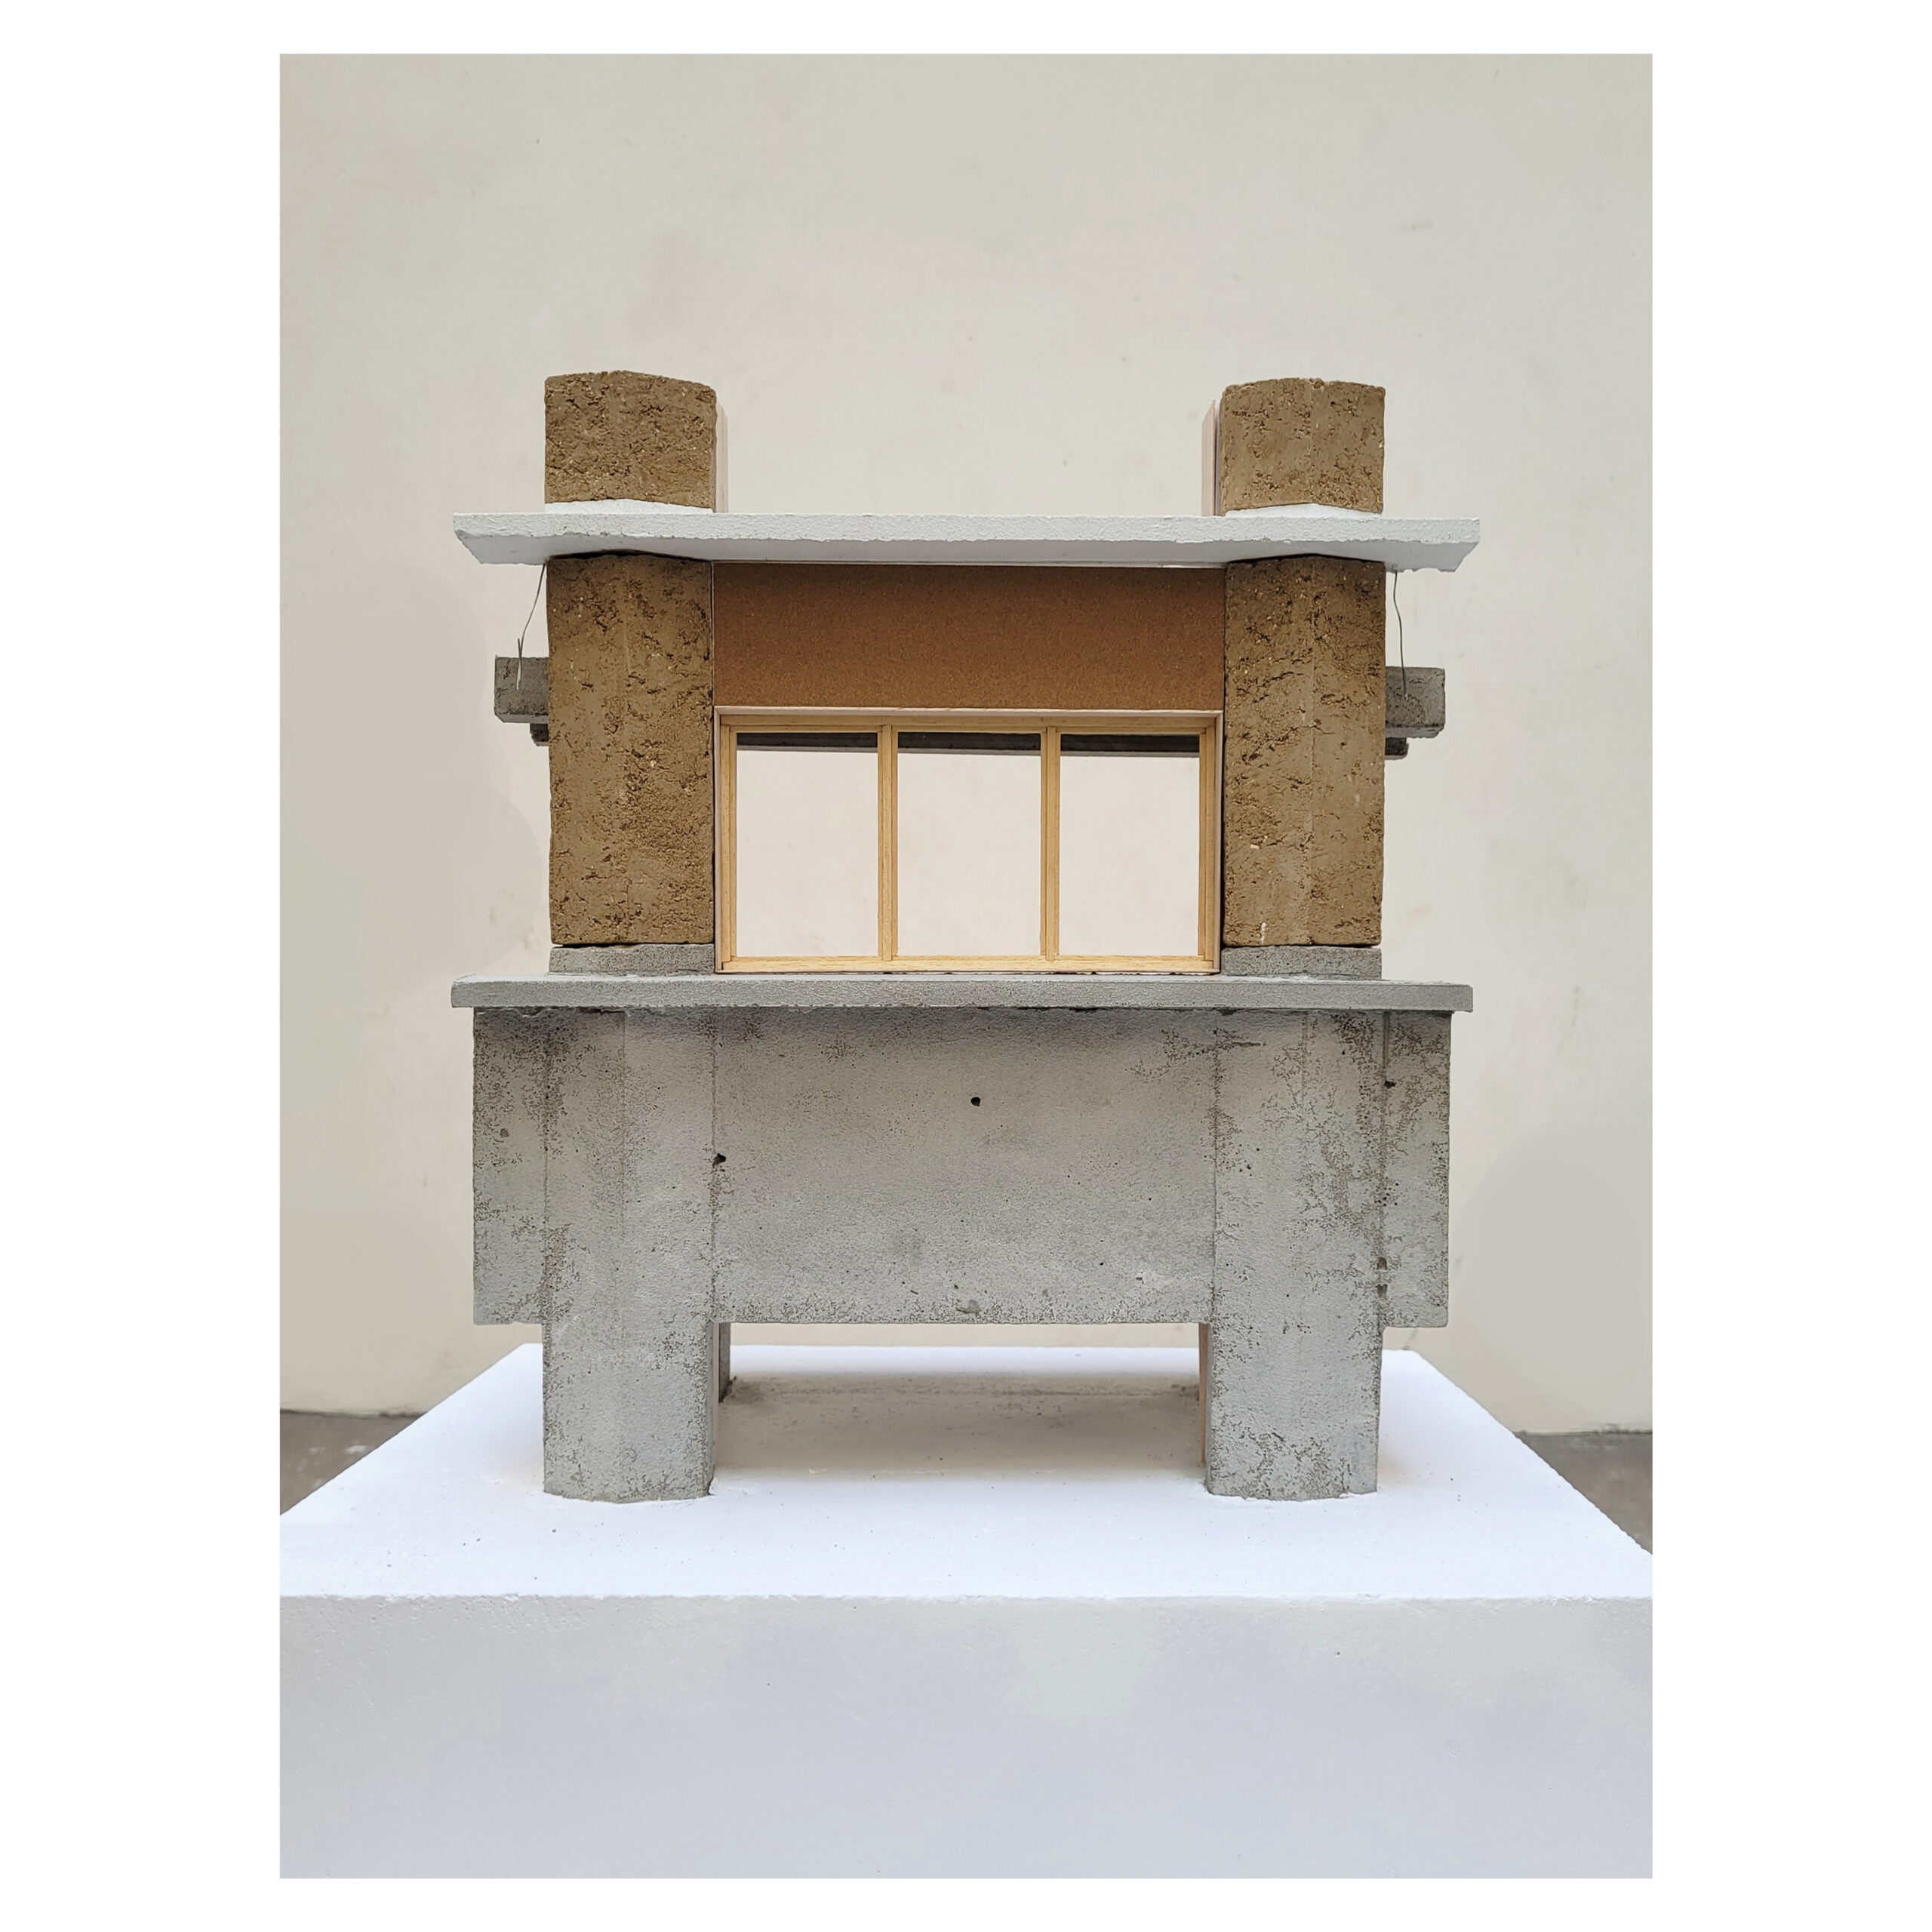 BELLECOMBE_Maquette Steen frontale